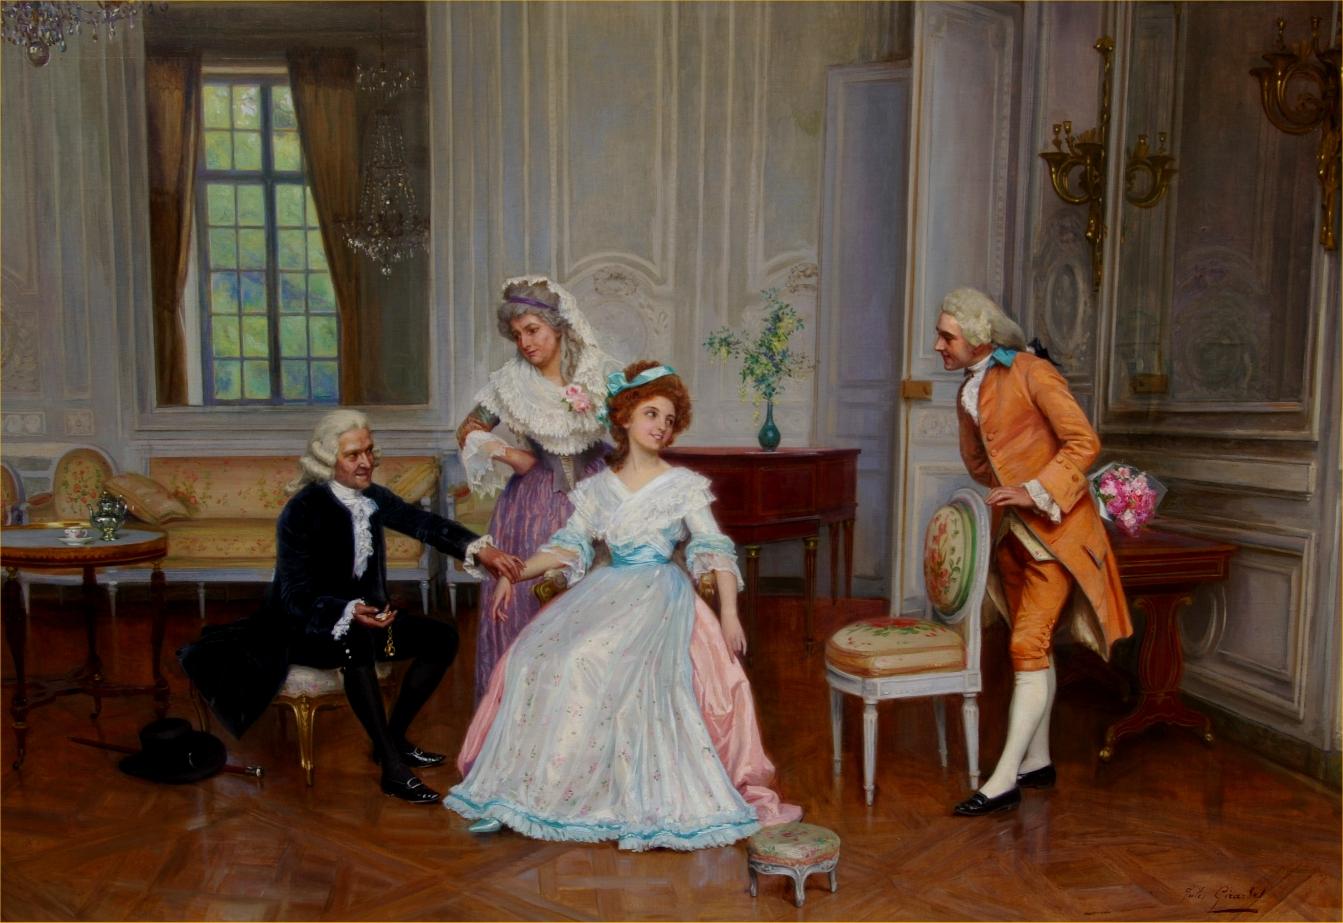 Interior Painting Jules Girardet - The Handsome Suitor (Le beau soupirant)